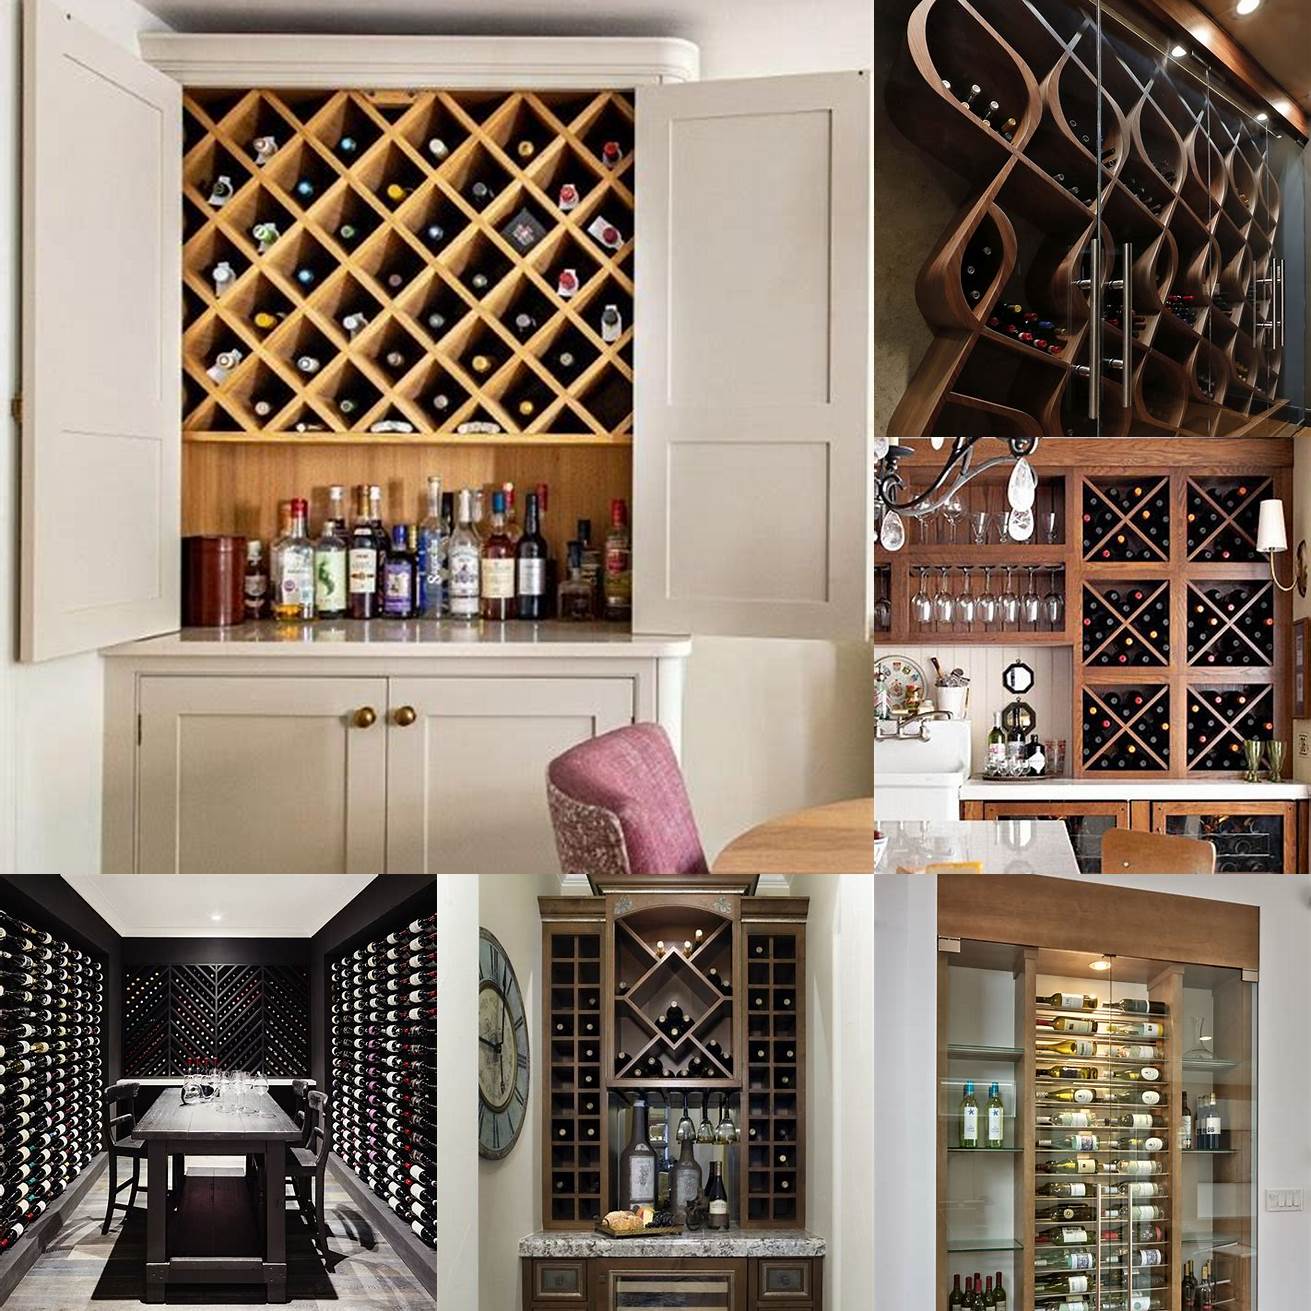 Image Idea 2 Built-in wine cabinet with a wood finish